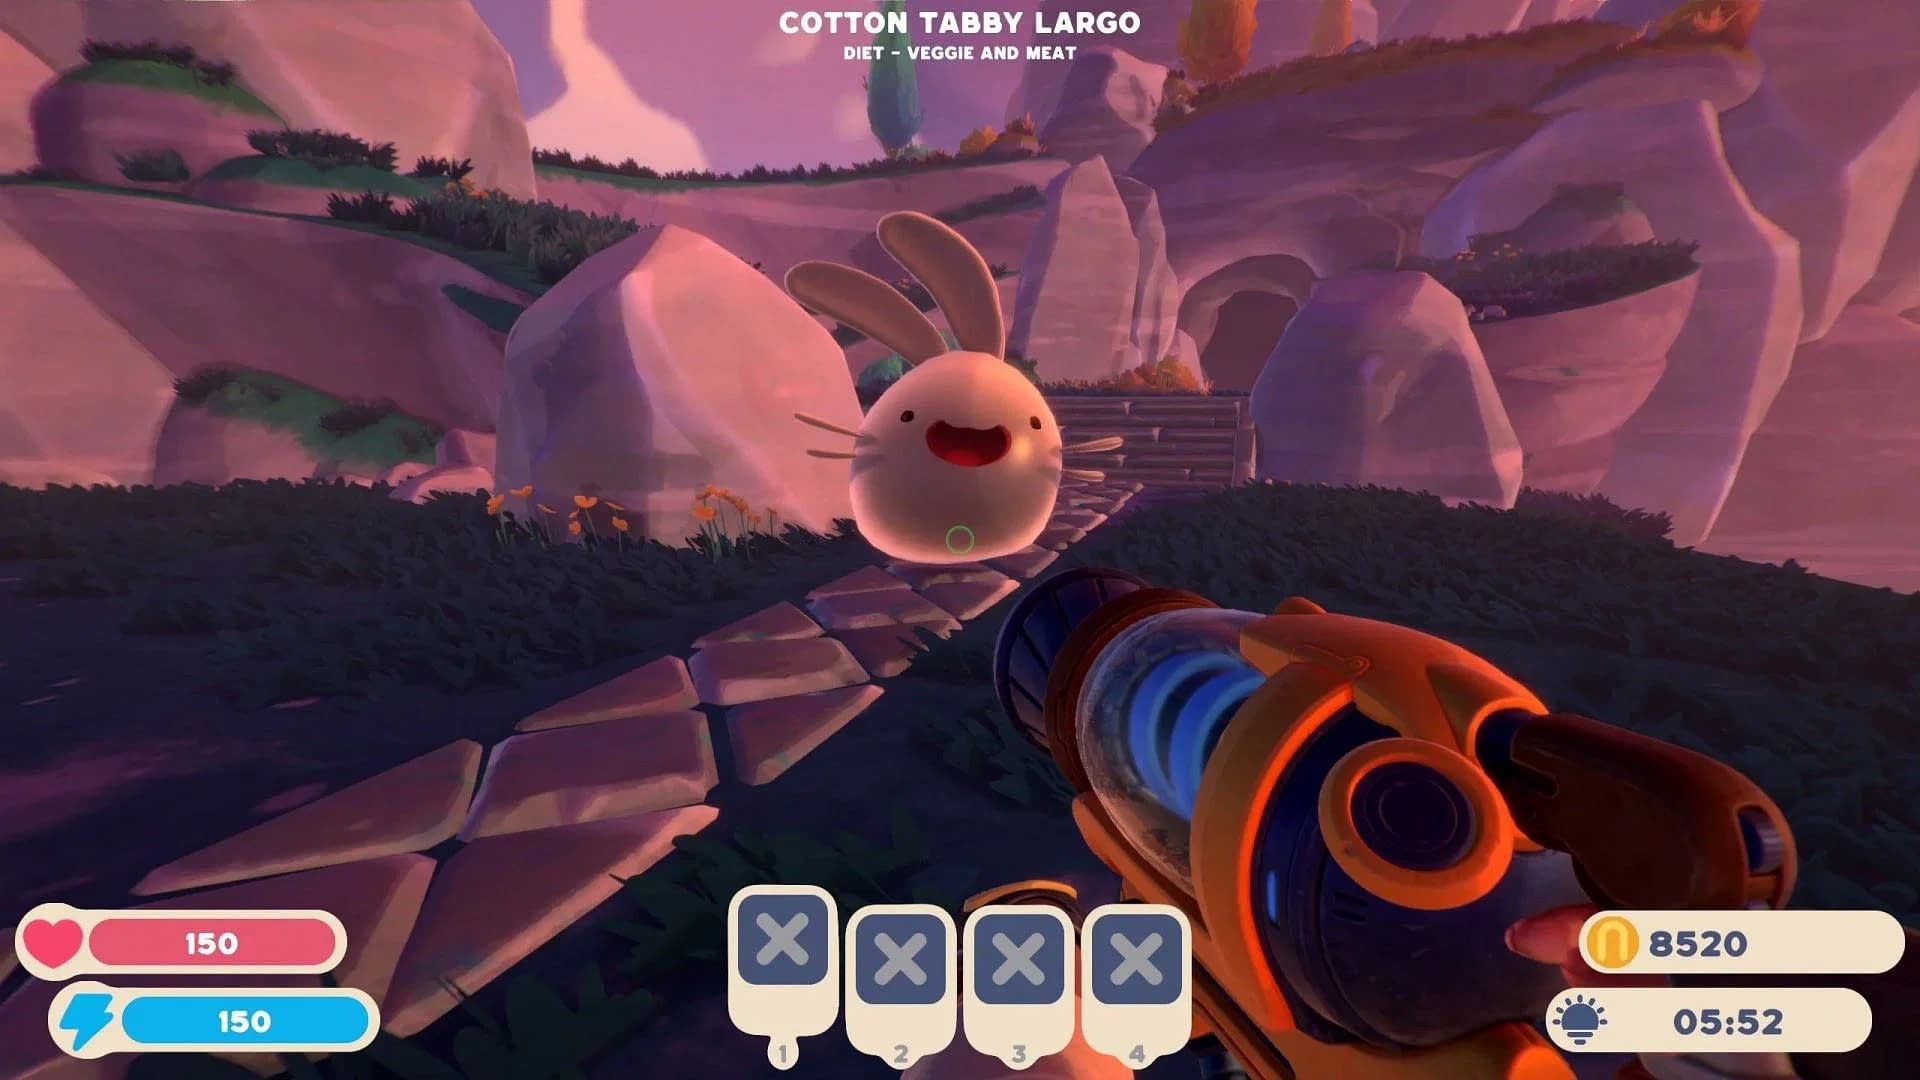 5 Featured Slime Combinations in Slime Rancher 2